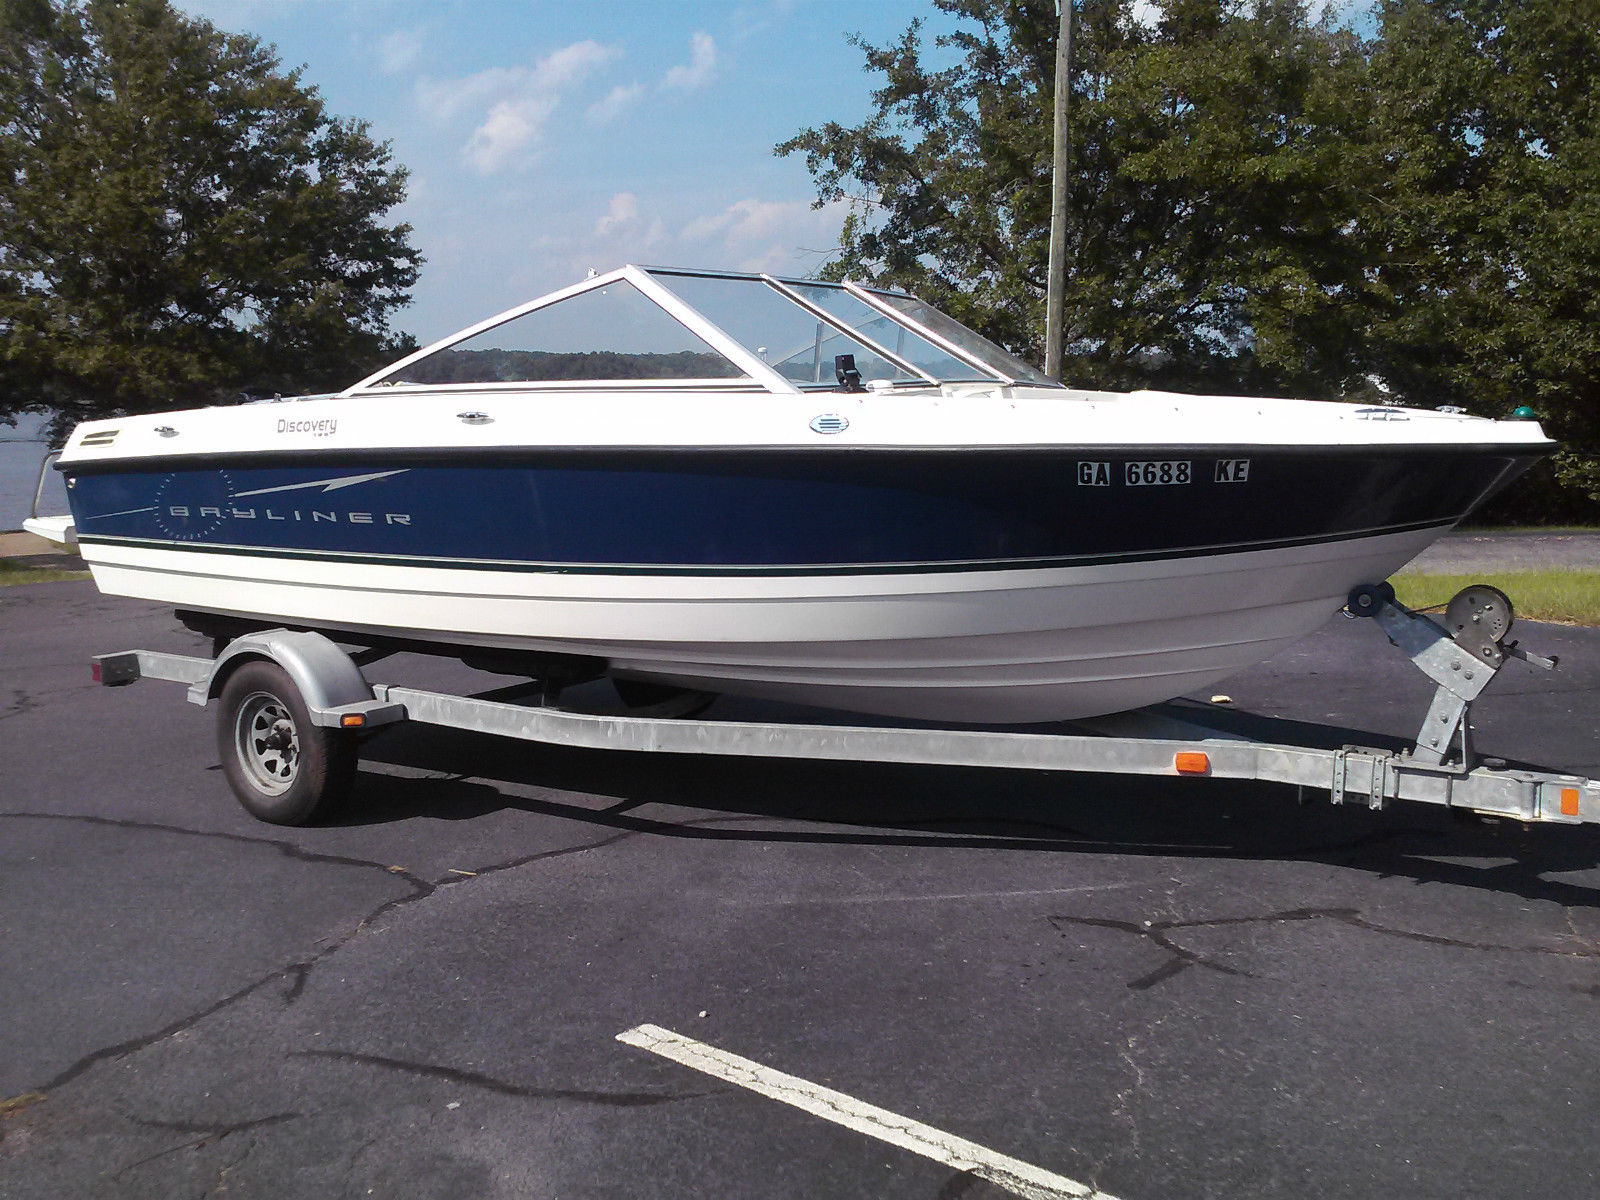 Bayliner Mercruiser 3.0 2007 for sale for $8,500 - Boats-from-USA.com